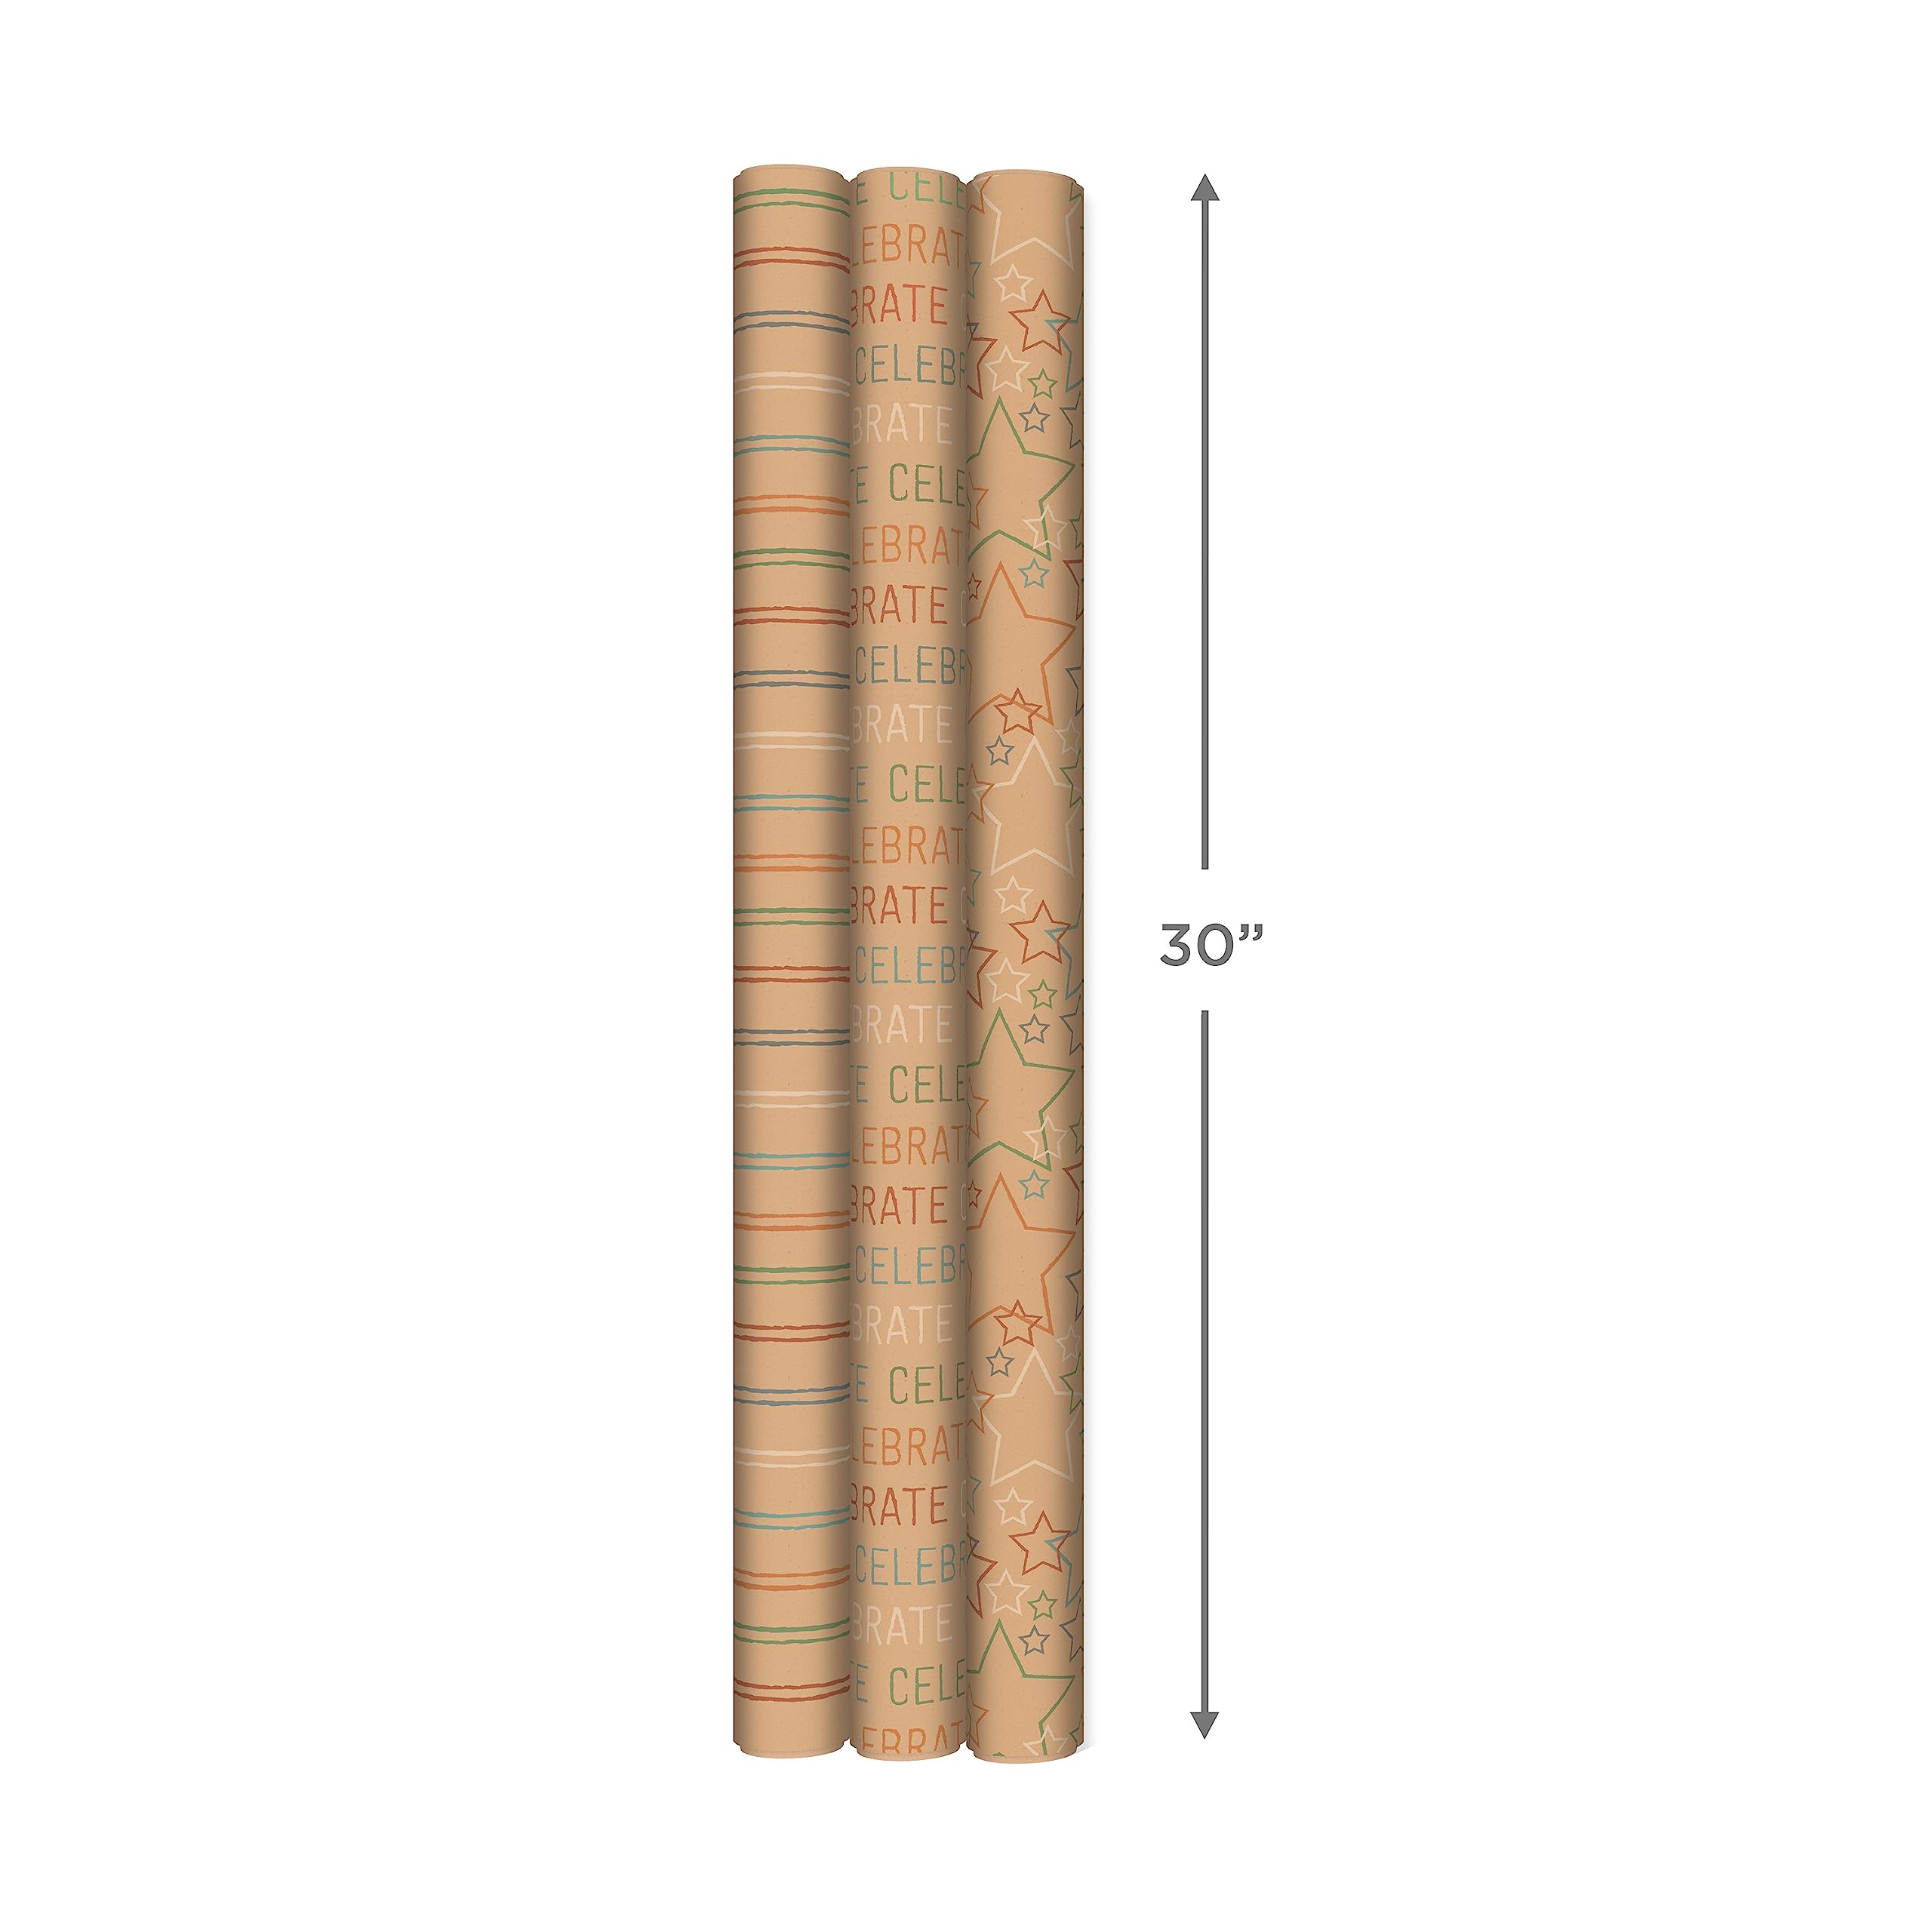 Hallmark Recyclable Wrapping Paper with Cutlines on Reverse (3 Rolls: 60 sq. ft. ttl) Rainbow Stripes, Celebrate, Stars on Kraft Brown for Birthdays, Graduations, Kids Parties